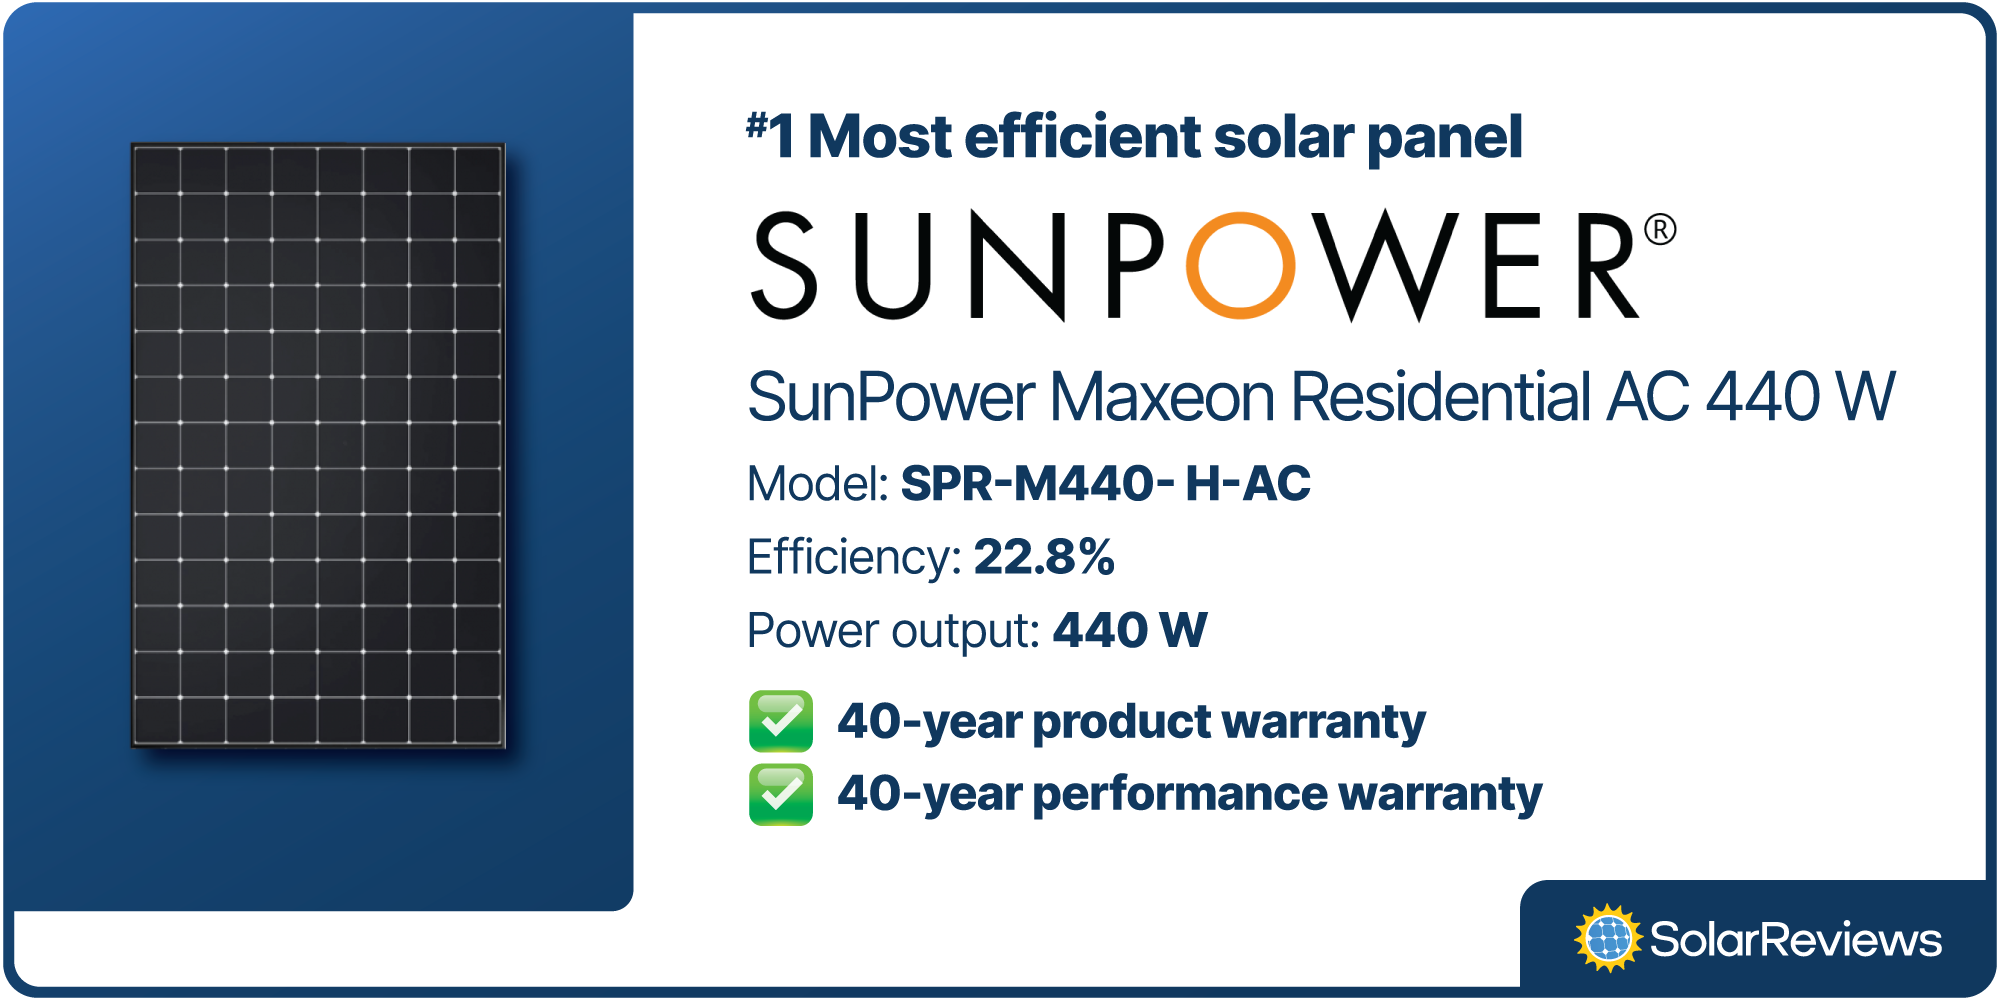 SunPower's Maxeon Residential AC 440 W solar panel is the most efficient home solar panel at 22.8% efficient and comes with 40-year product and performance warranties.